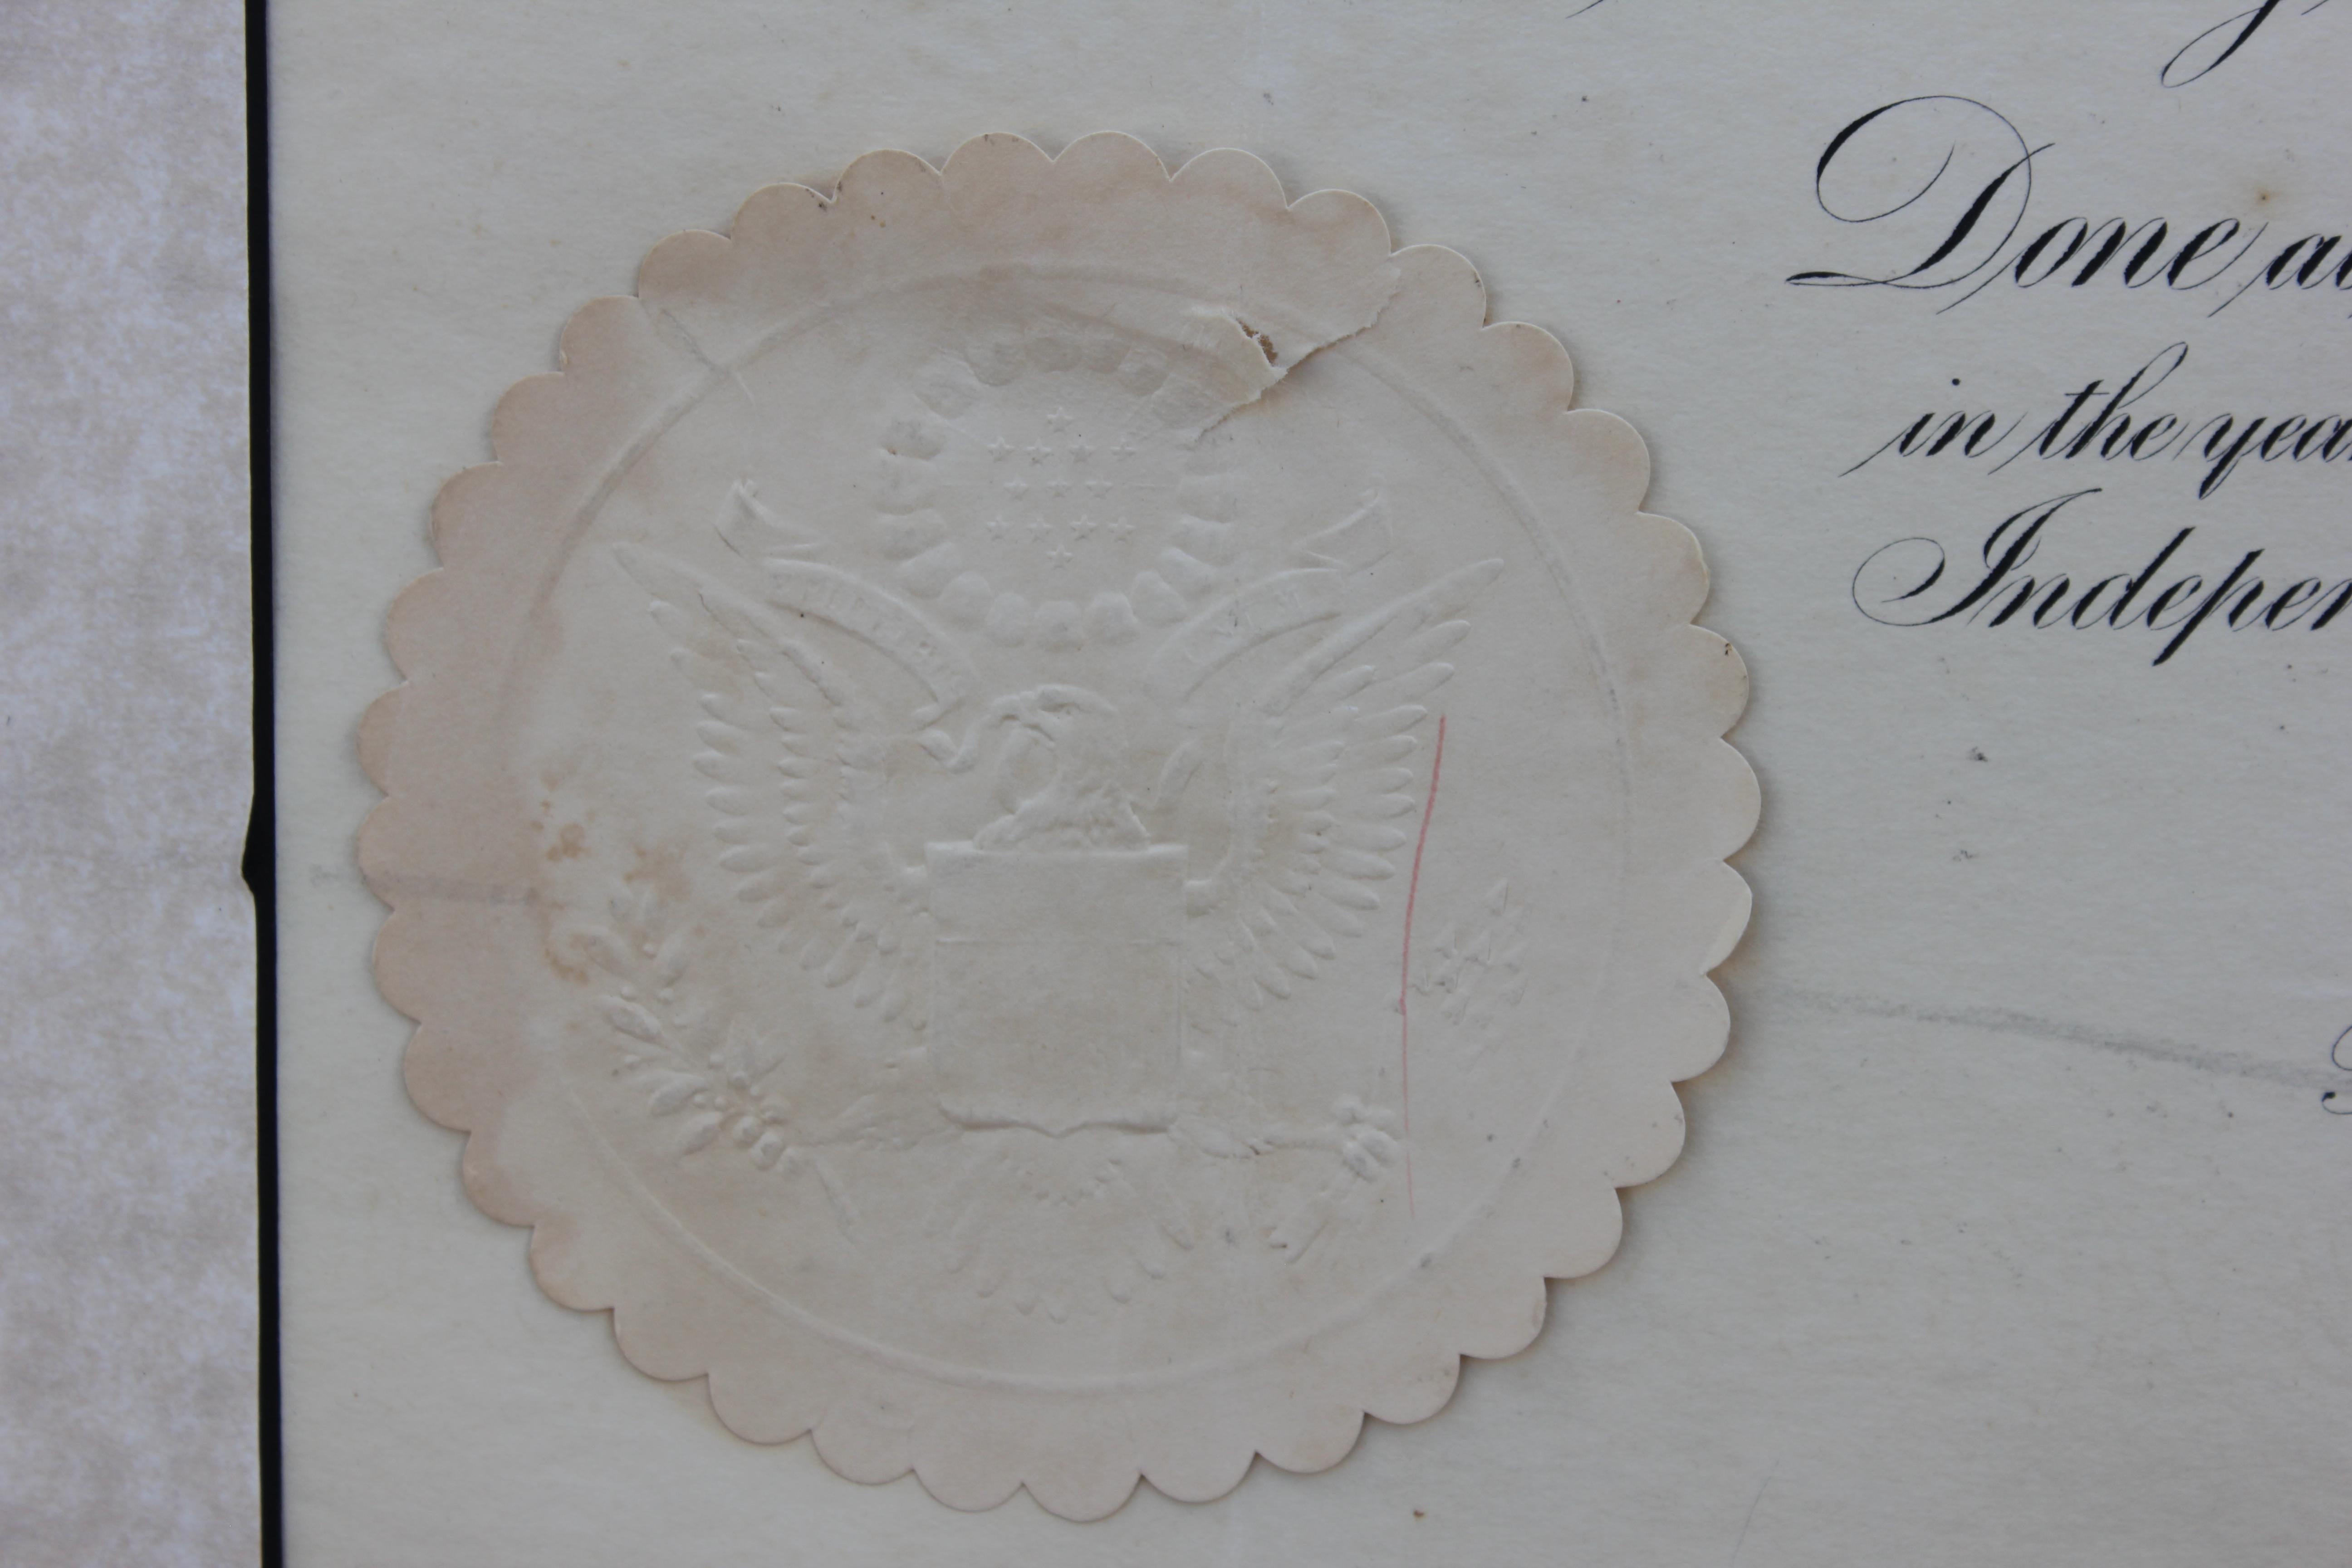 Presidential Seal with Calvin Coolidge Signed Document - Modern Print by Unknown